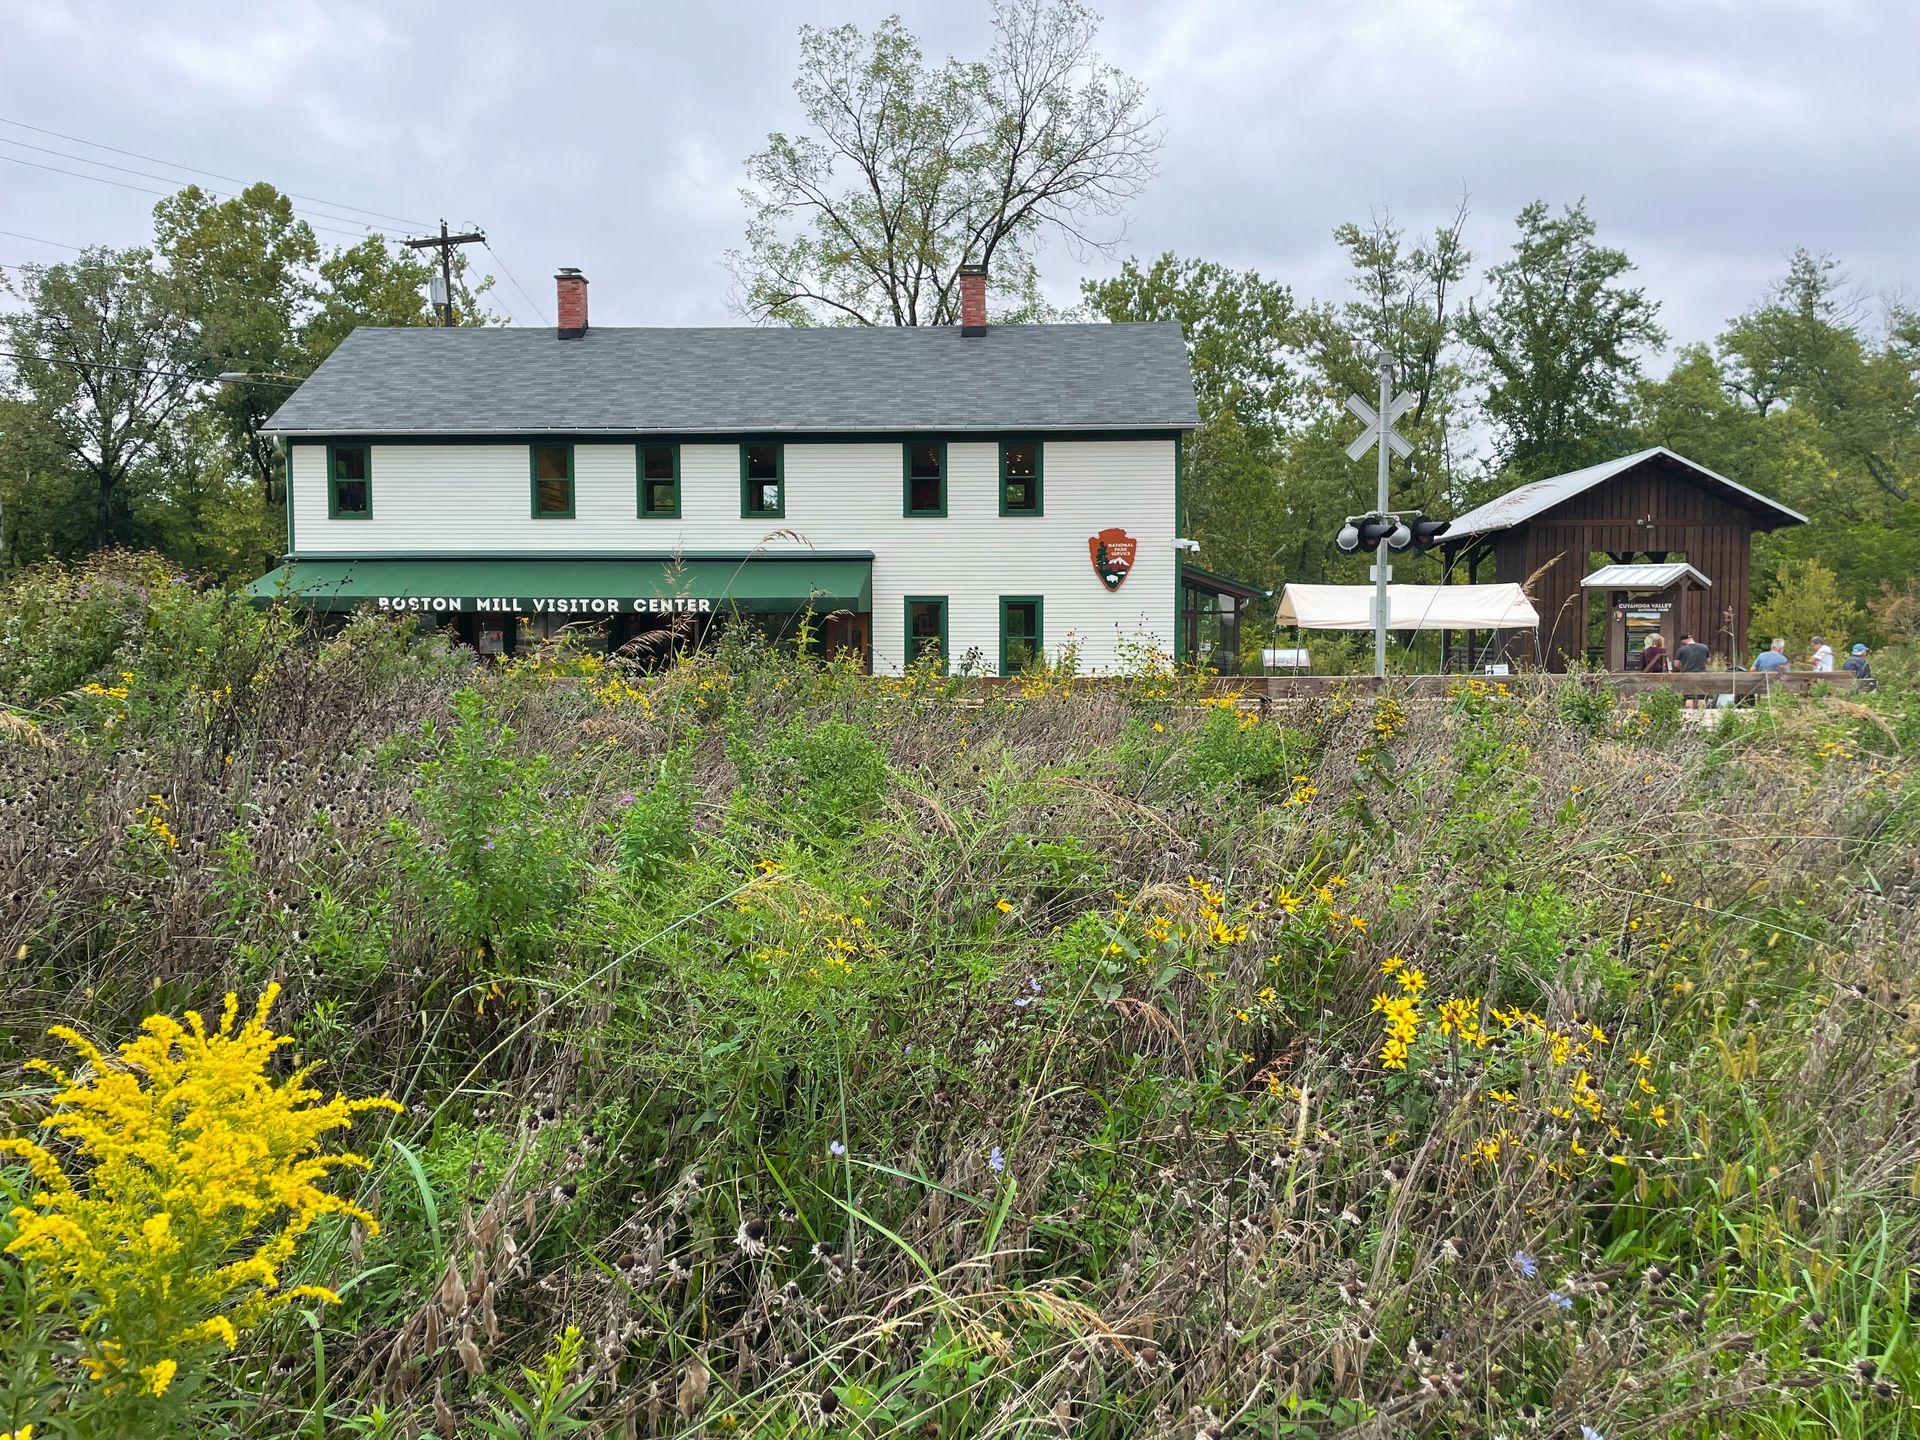 A photo of the front of the Boston Mill Visitor Center with green grasses and yellow flowers in front.